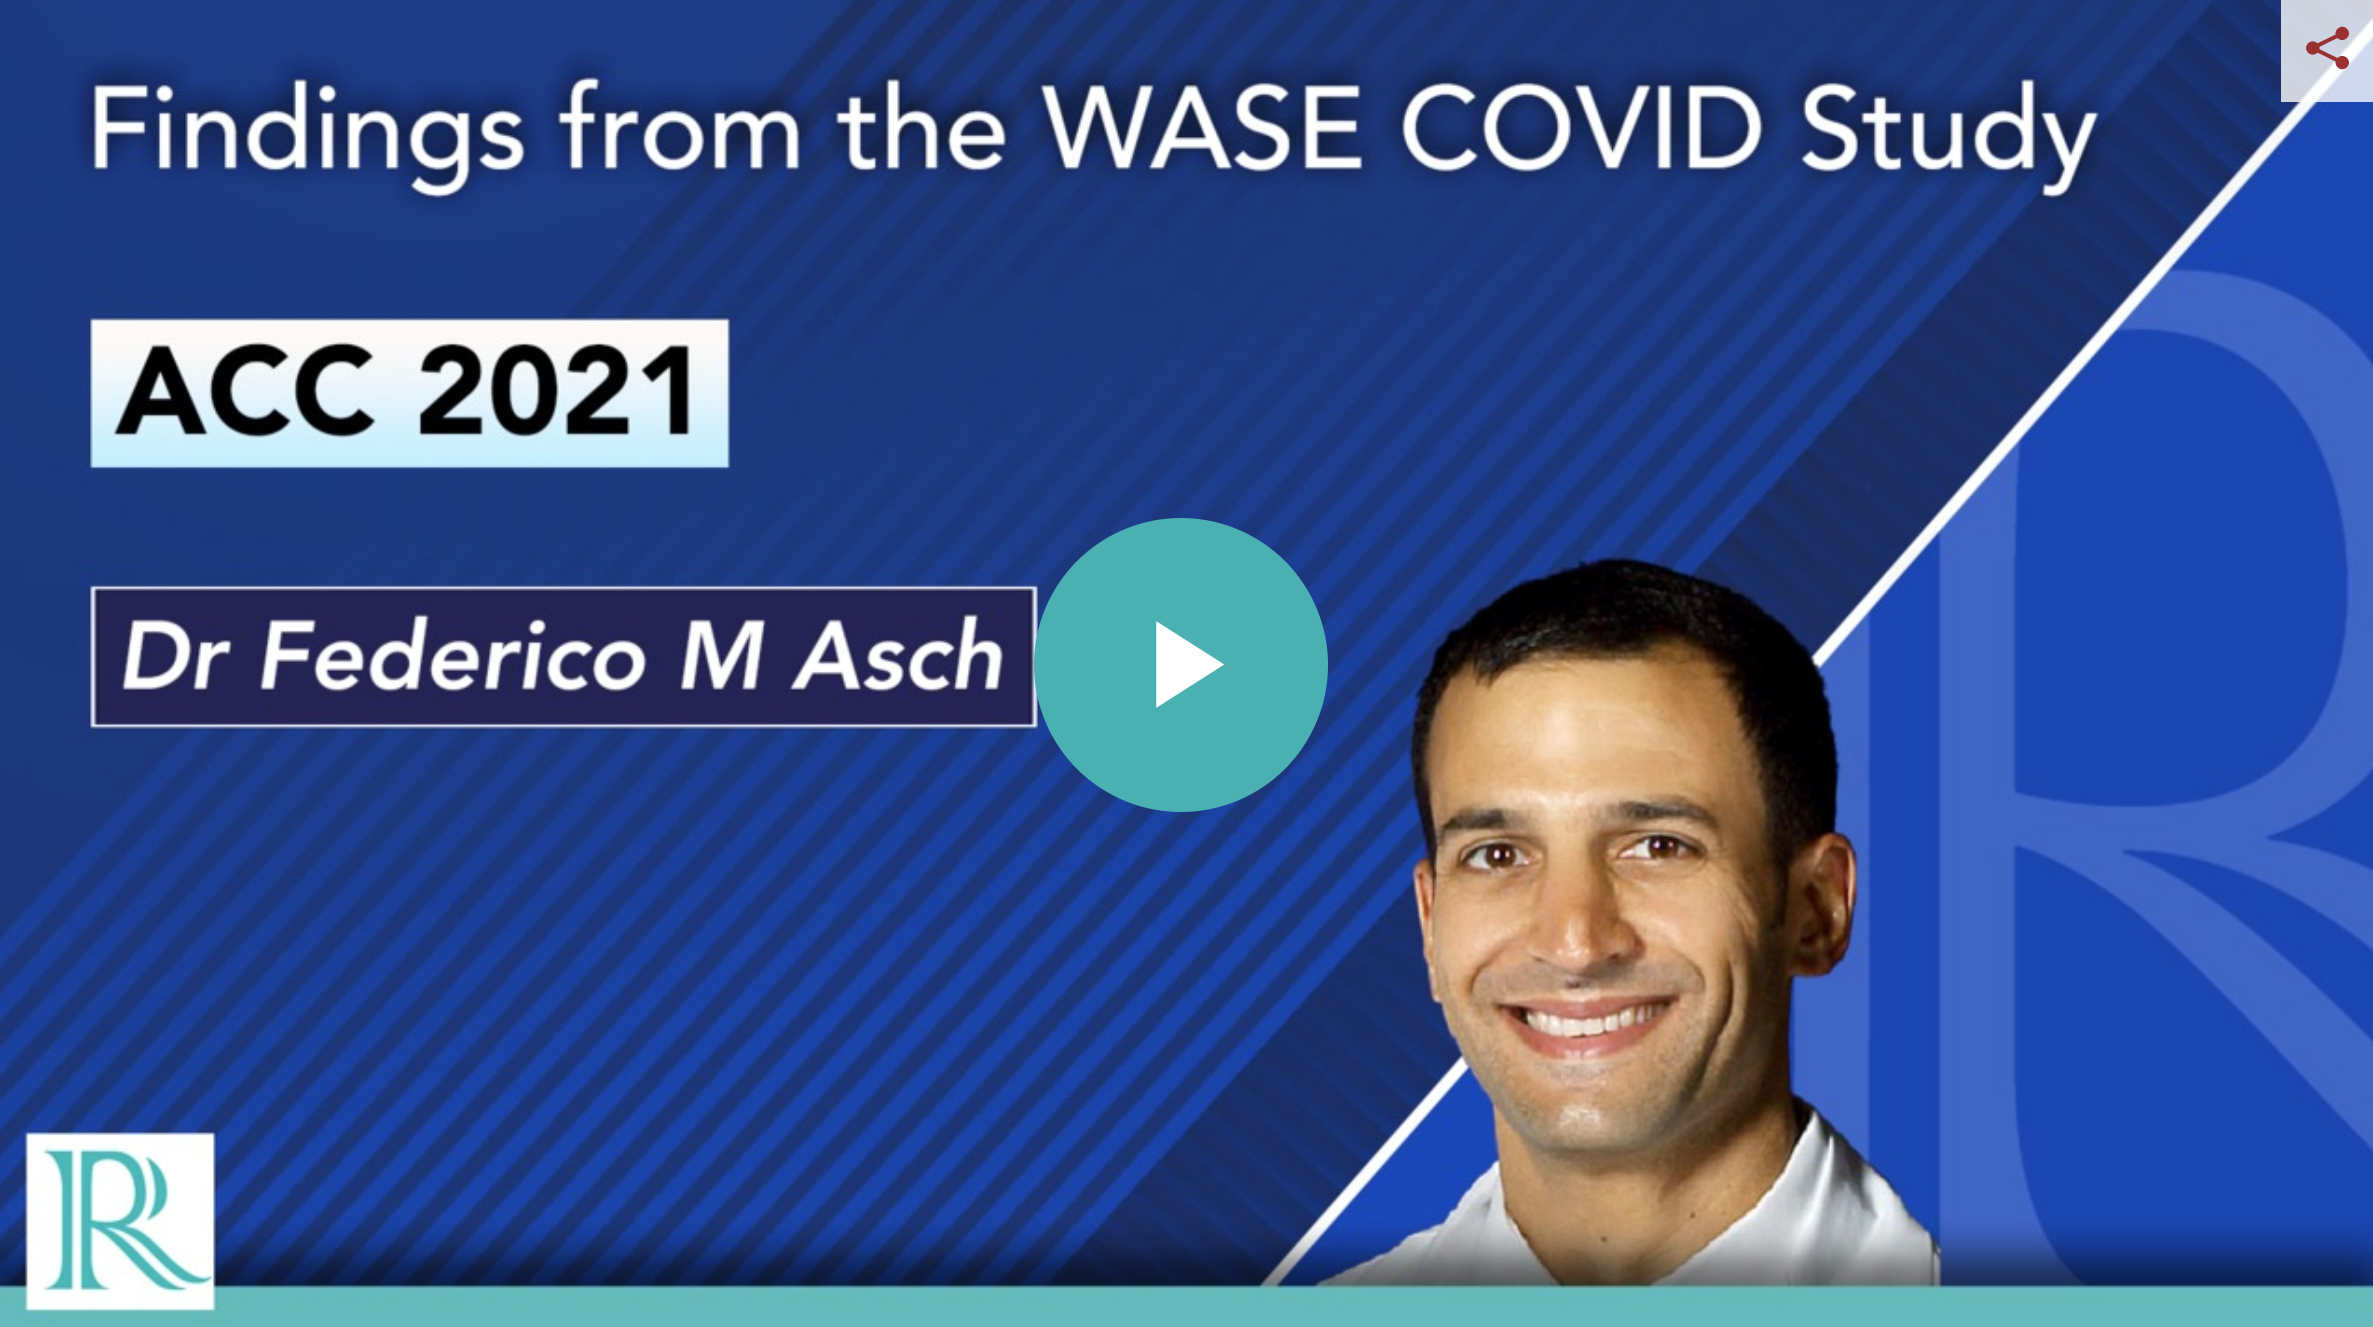 A video player showing a slide with the text "Findings from the WASE COVID study ACC 2021 Dr Federico M Asch"